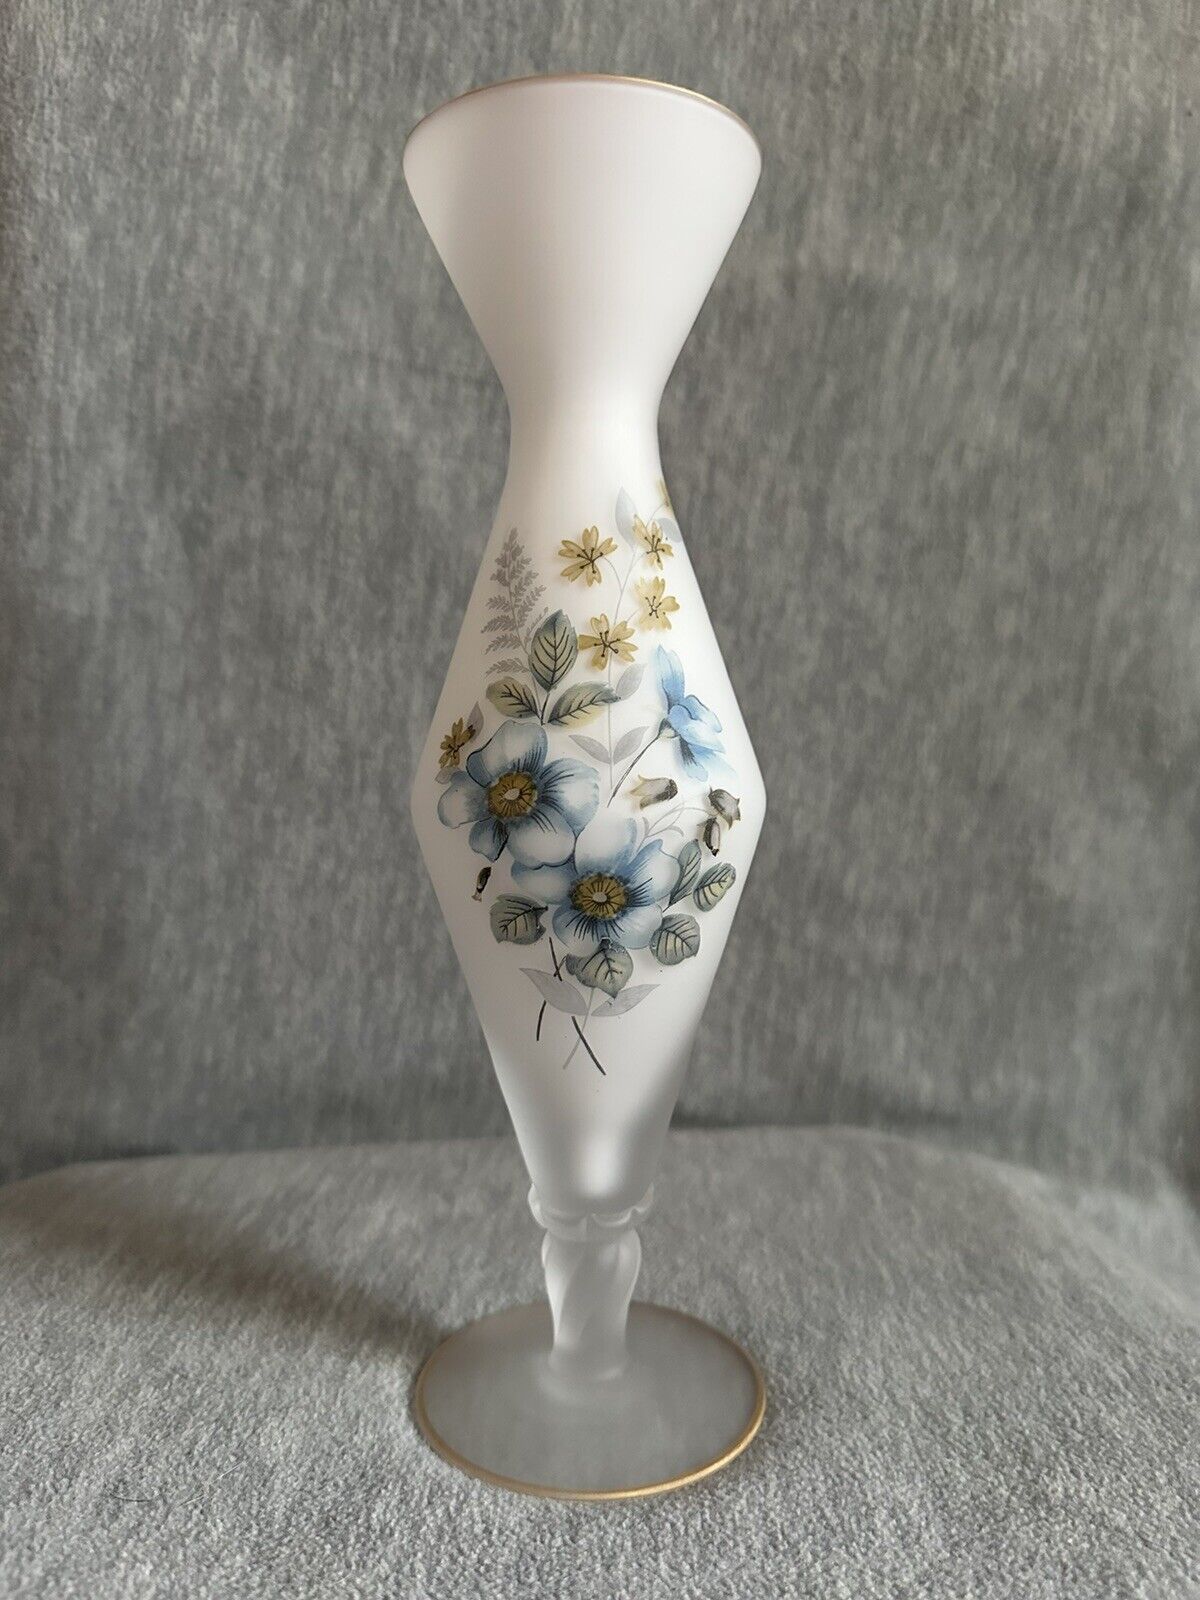 Vtg White Satin Vase With Hand Painted Flowers With Twisted Stem And Gold Trim